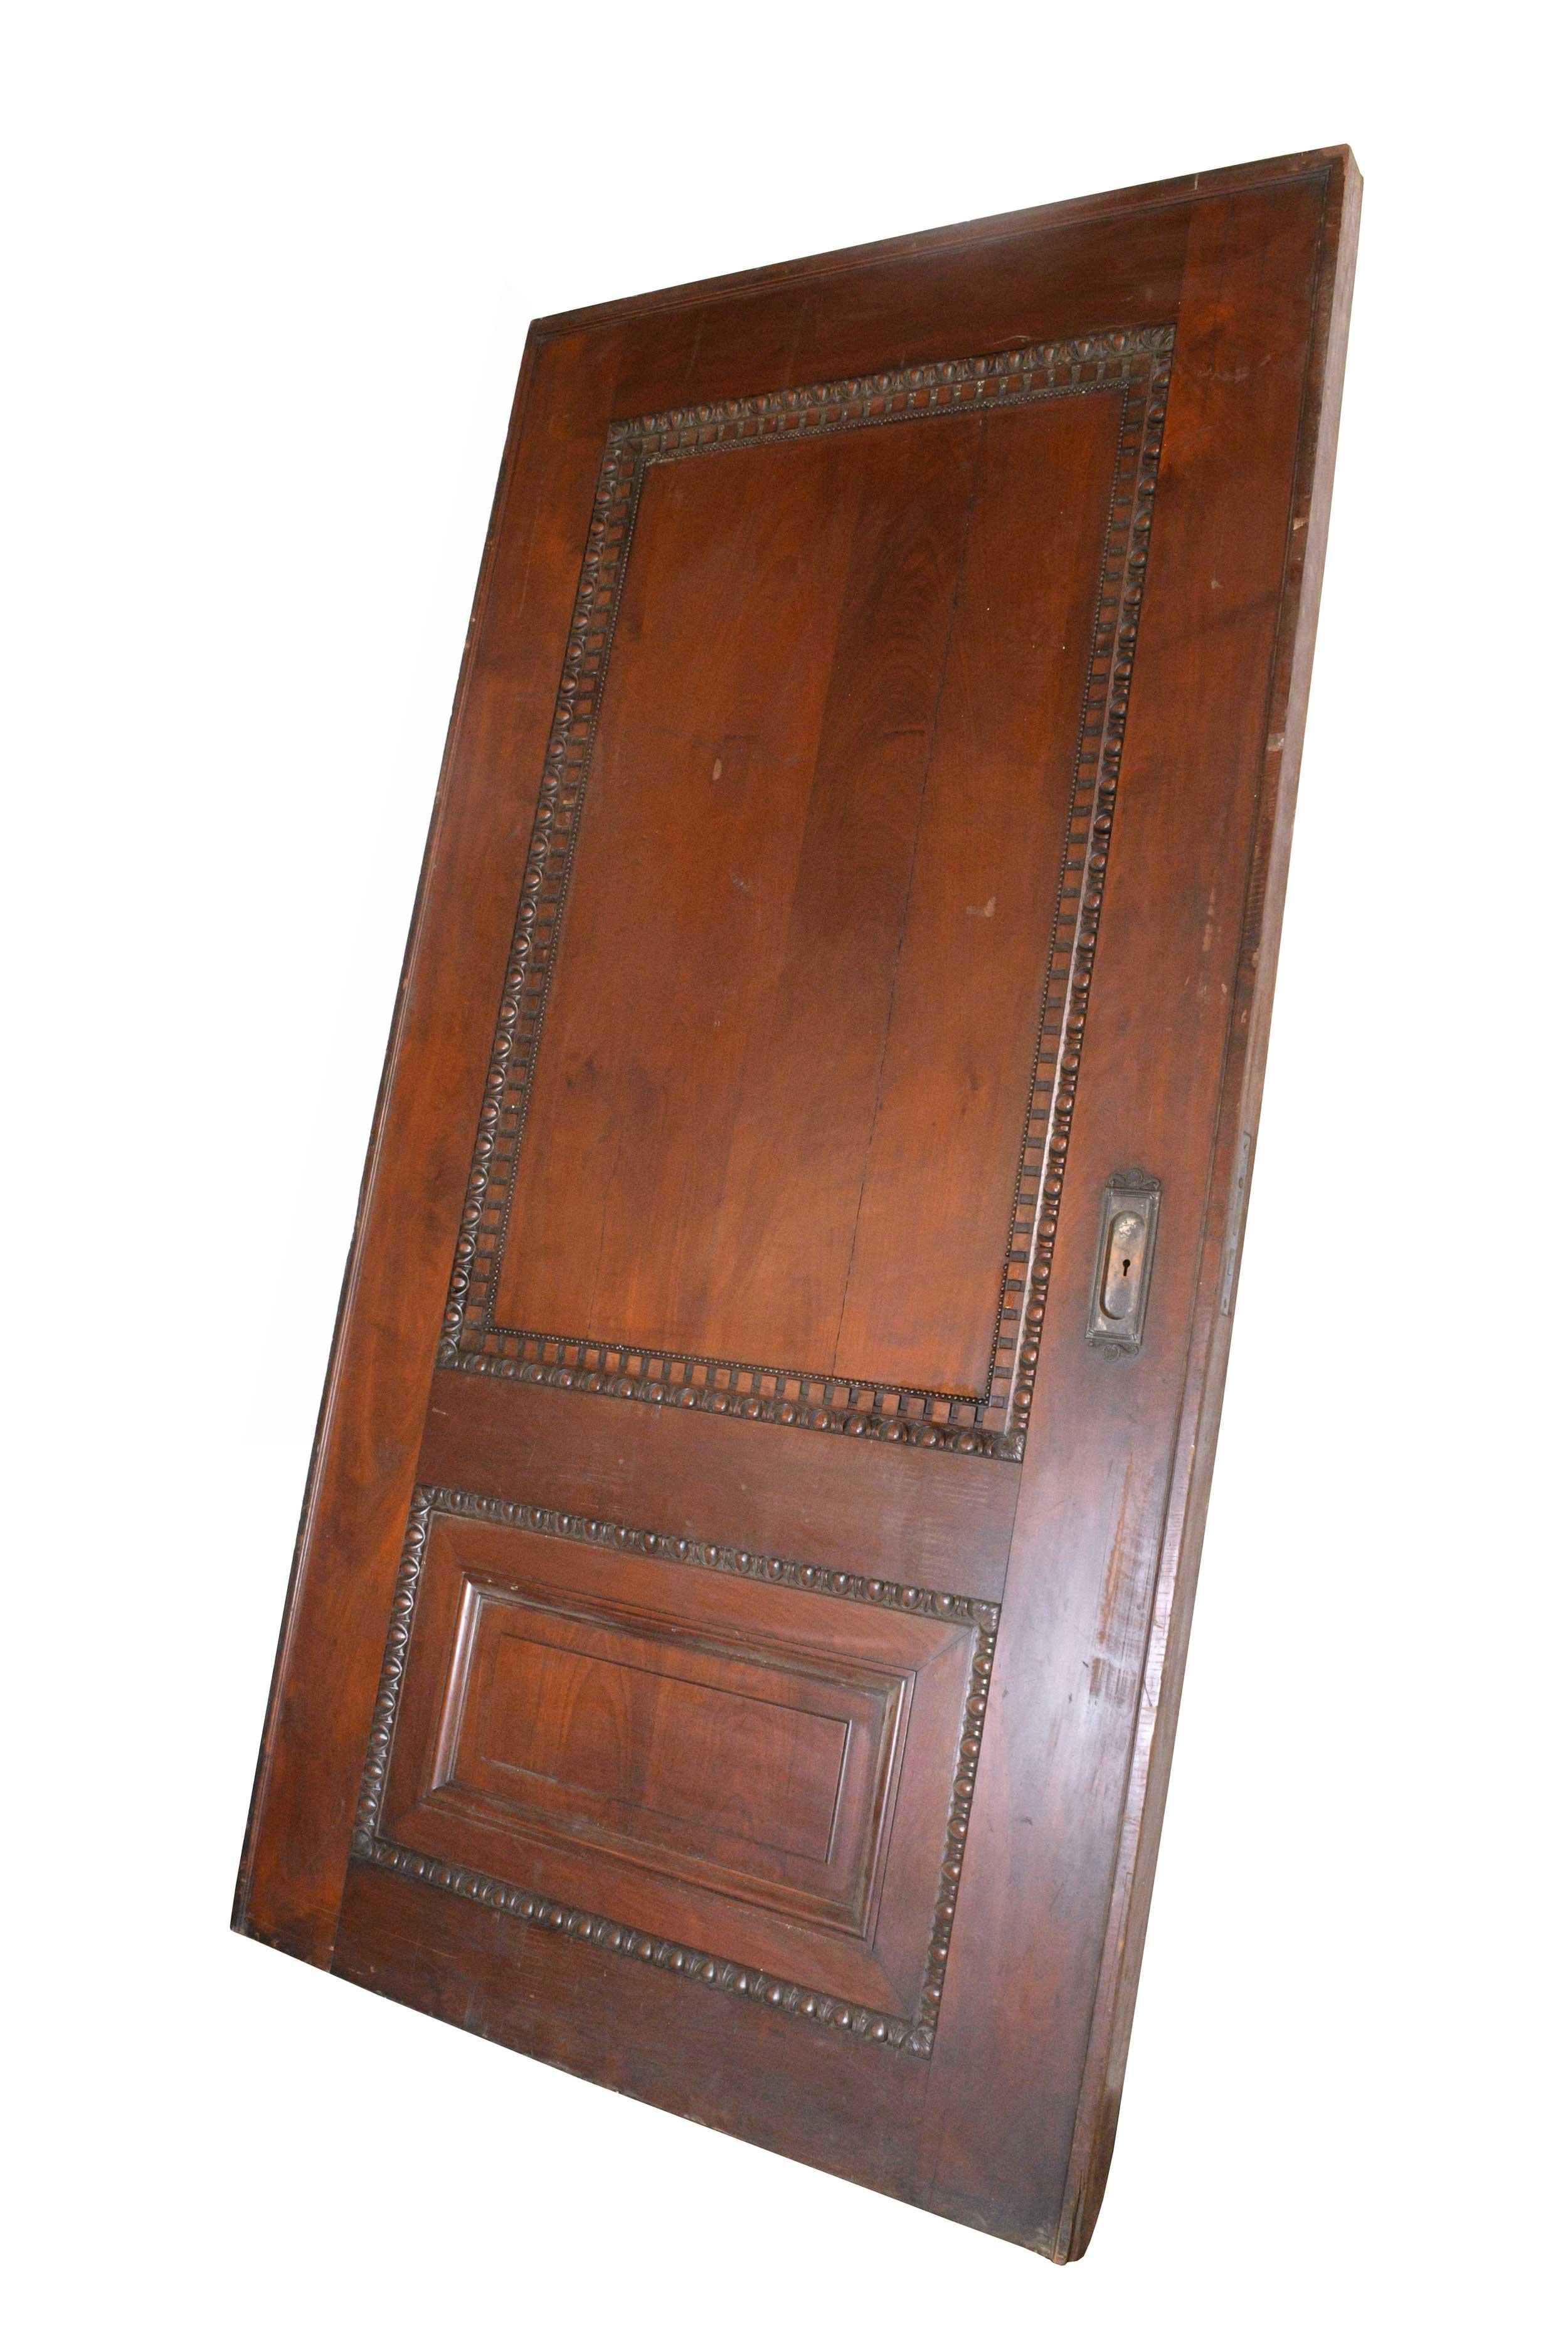 Impressive and stately carved oak pocket door over three inches thick. Features egg and dart details, dentil molding, and beading surrounding the recessed panels. Ornate bronze hardware adorns either side. The door is in good condition with a long